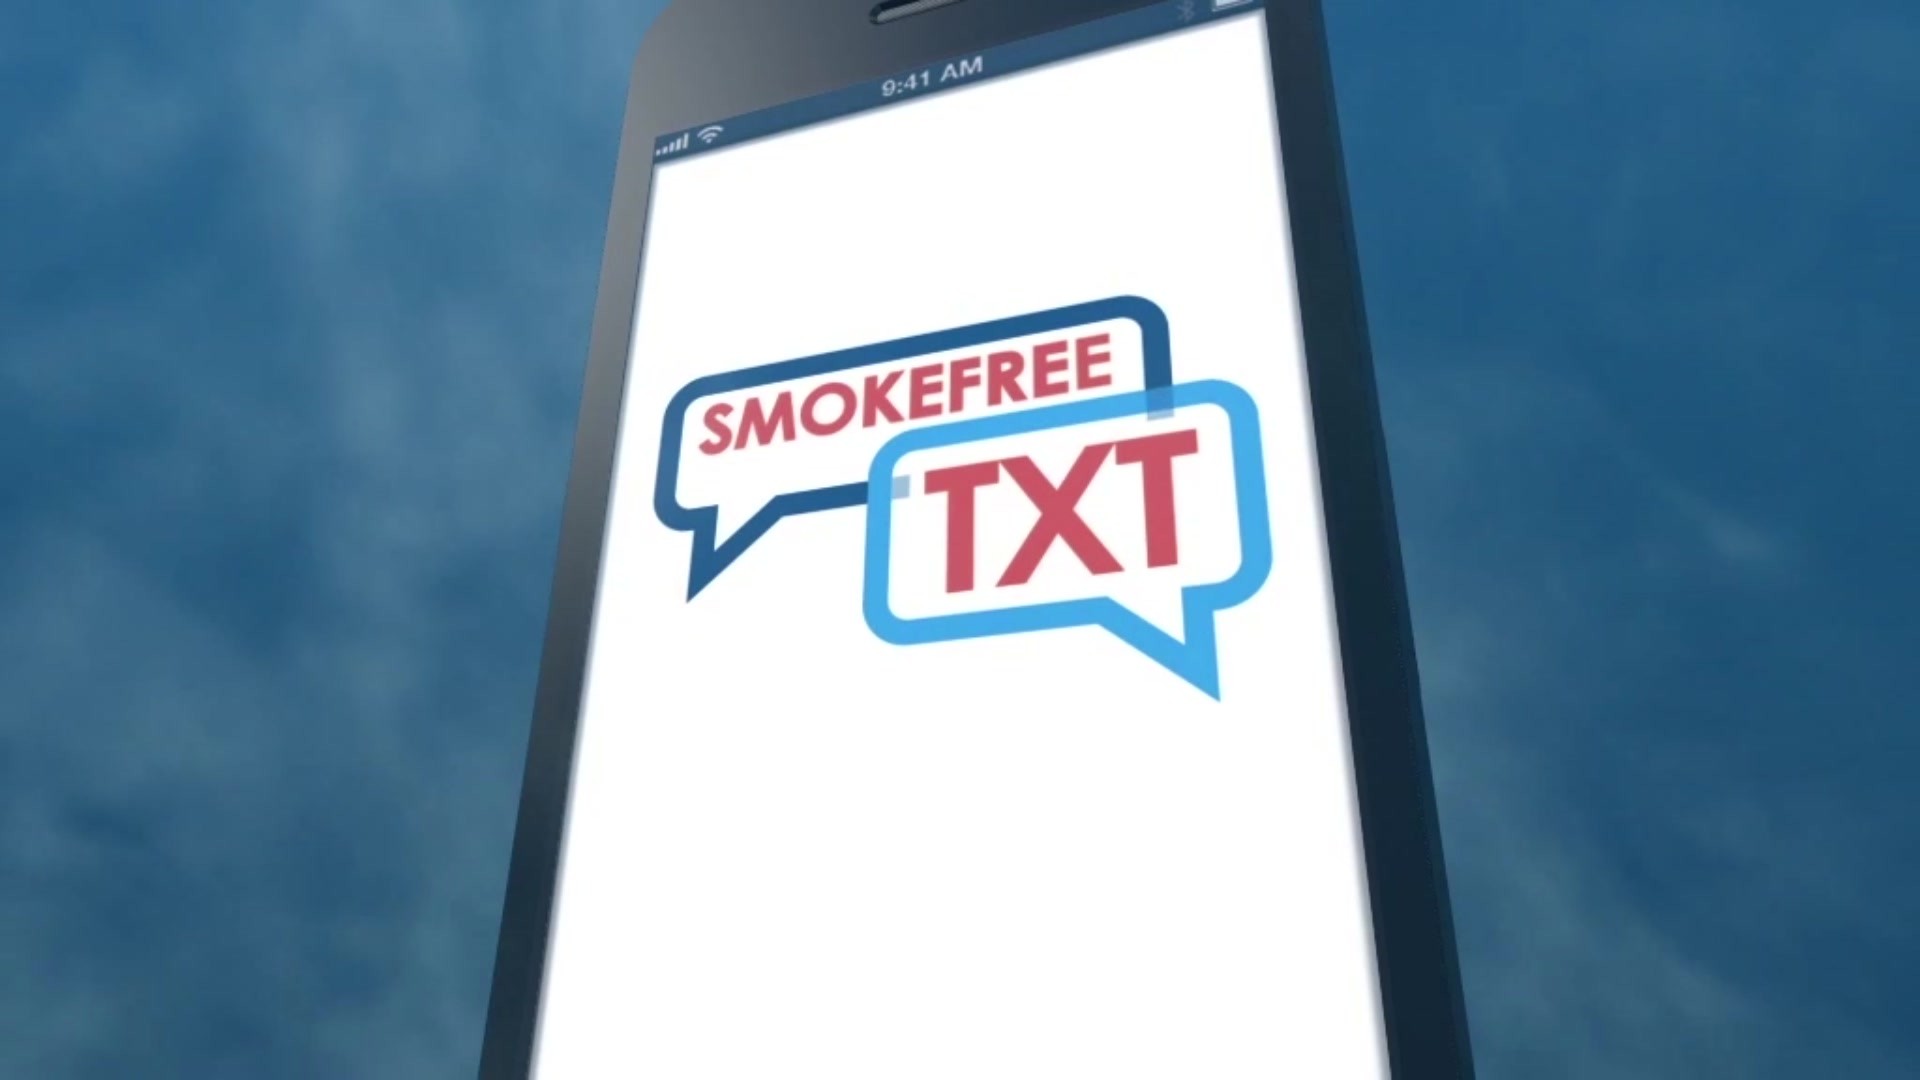 USING TEXT MESSAGING TO HELP SMOKERS QUIT